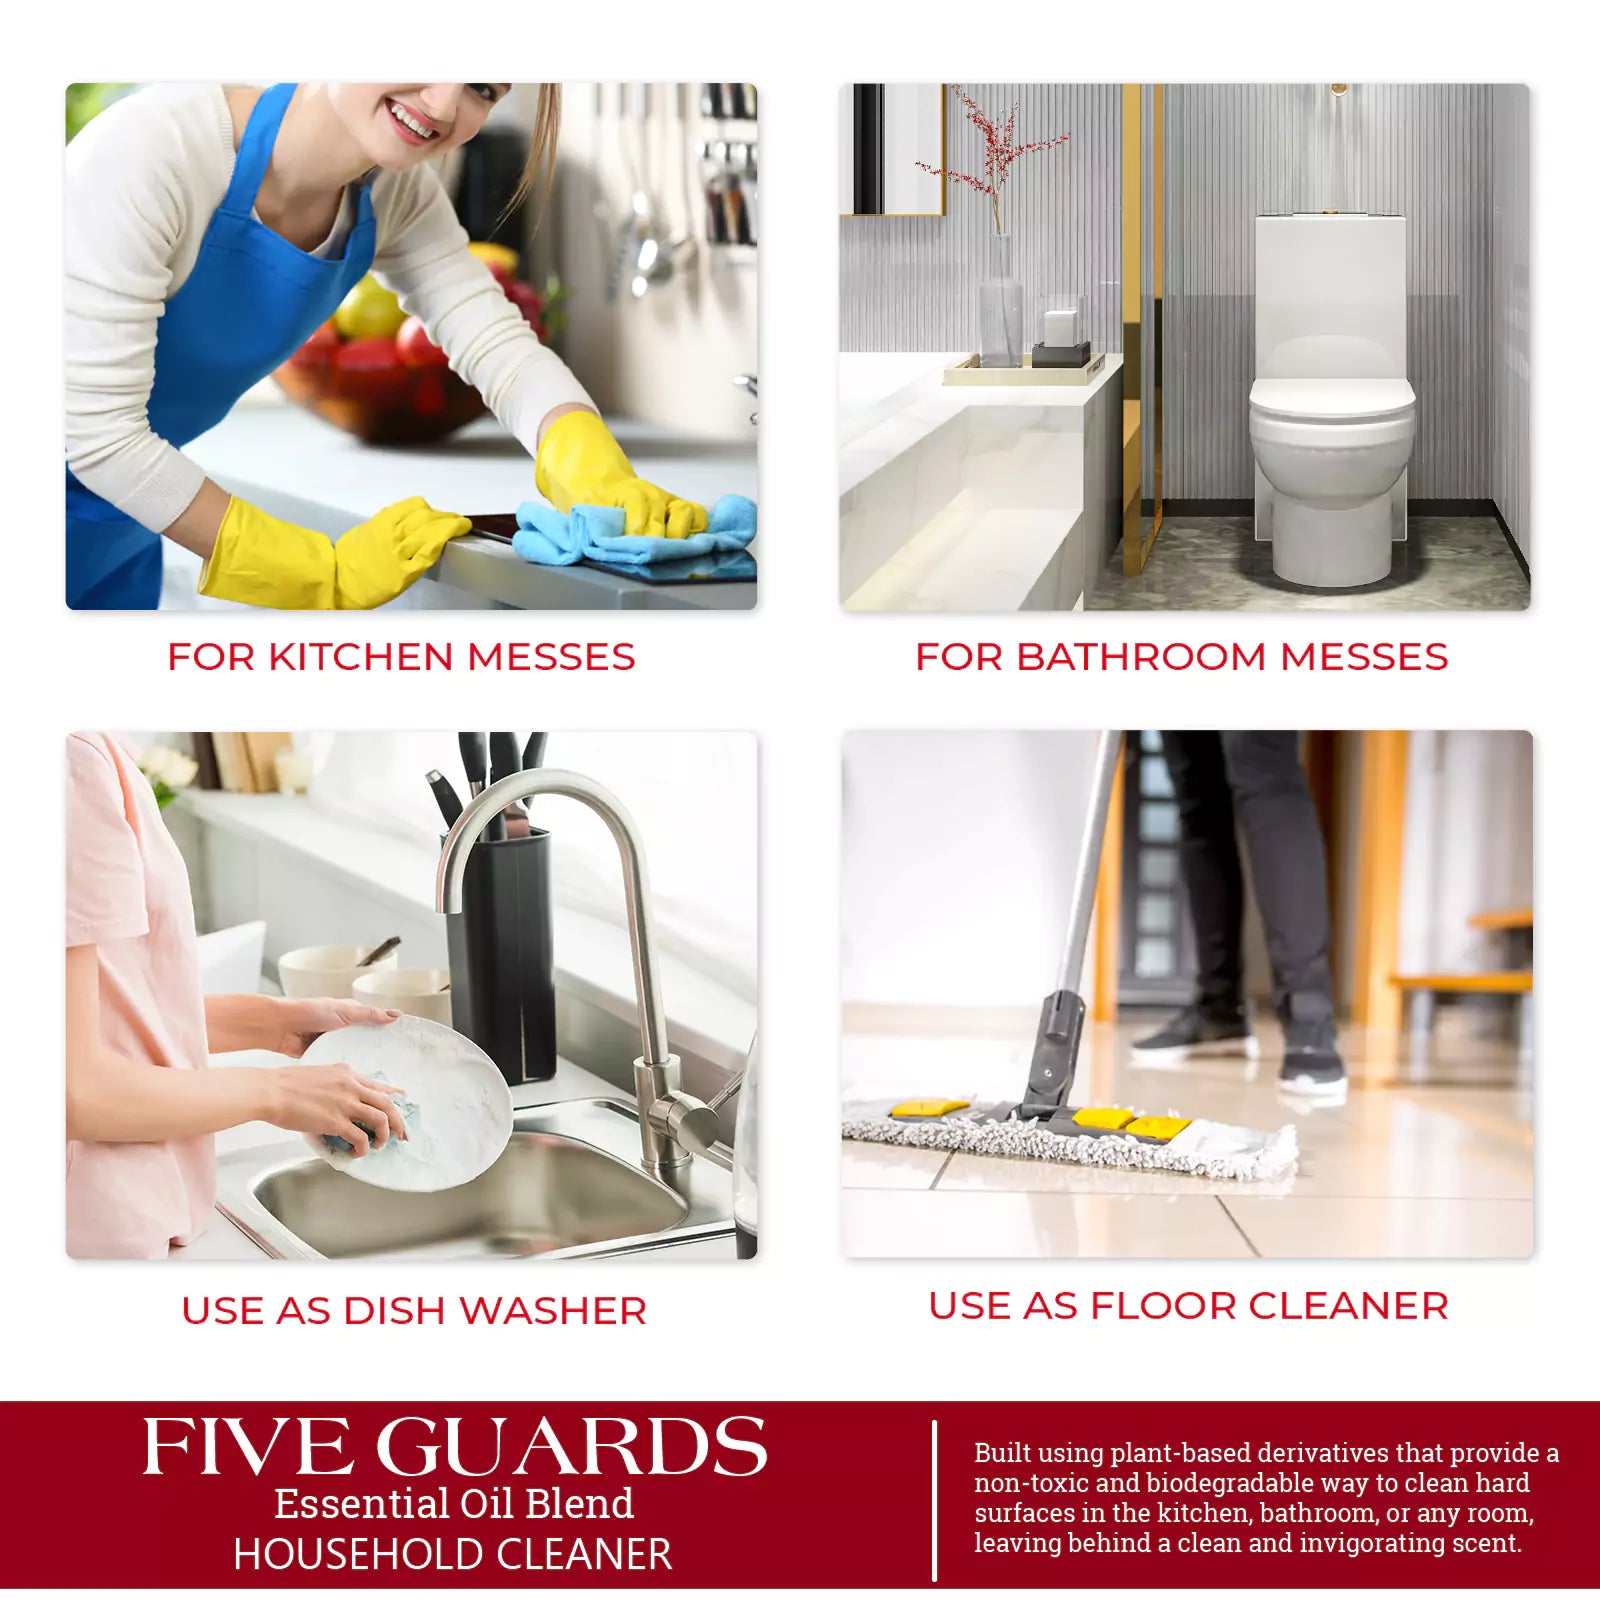 Five Guards Household Cleaner with Basil